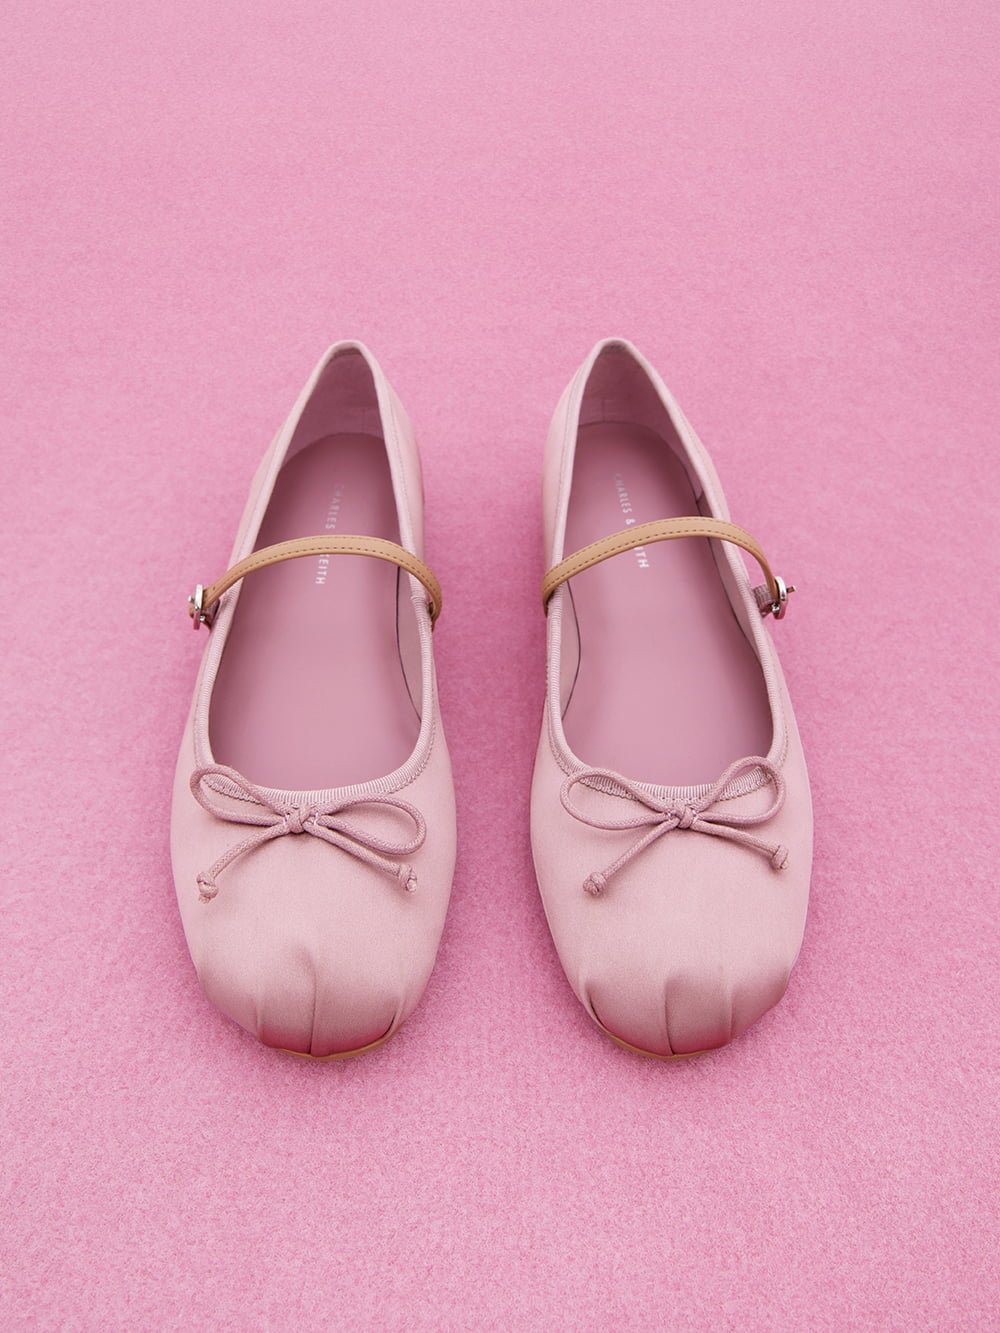 Women’s pink Satin Bow Mary Jane Flats – CHARLES & KEITH